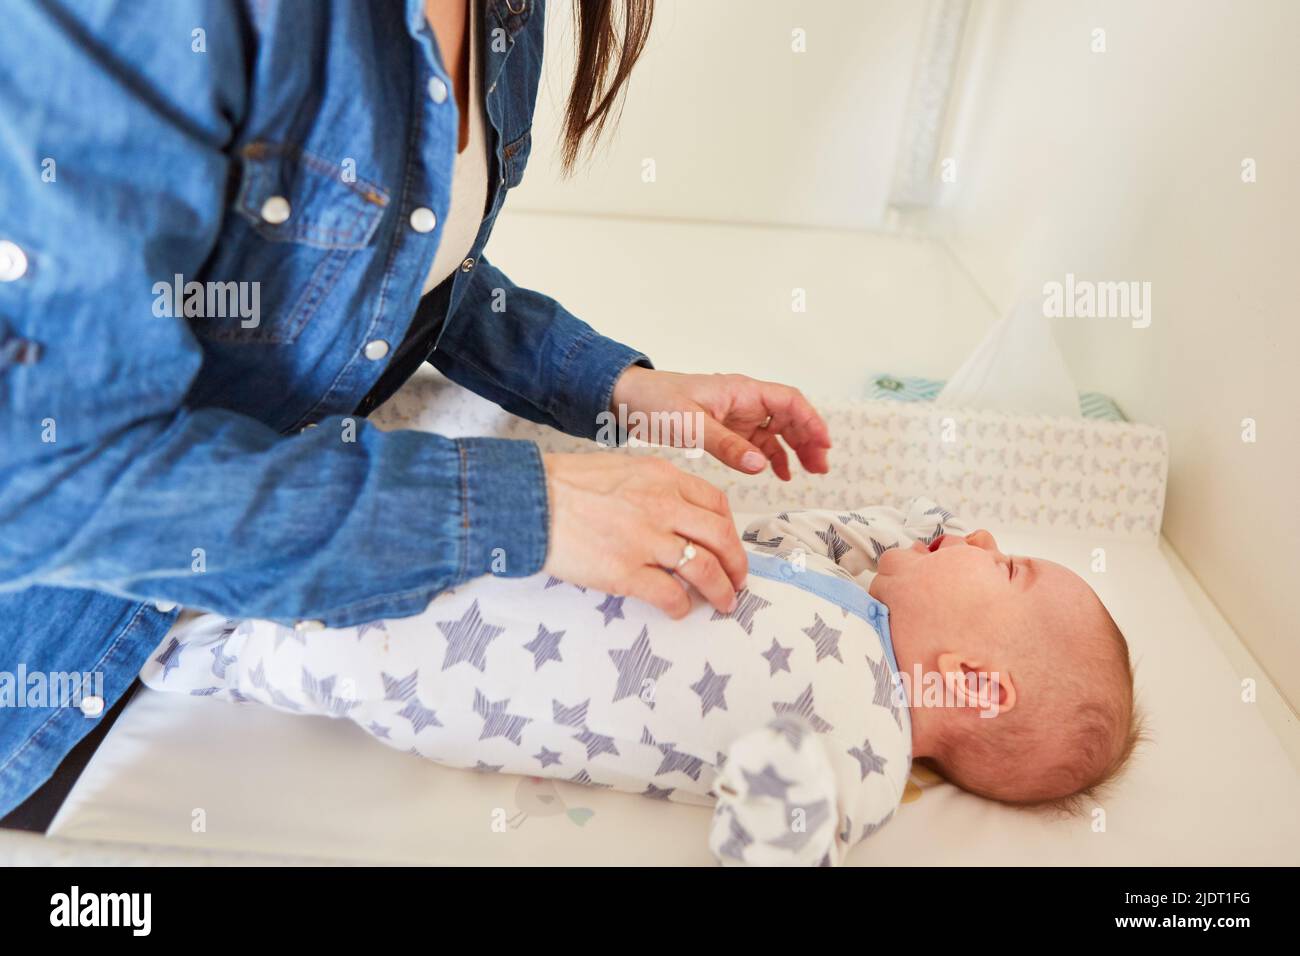 Baby in pajamas on the changing table is looked after by the caring mother Stock Photo